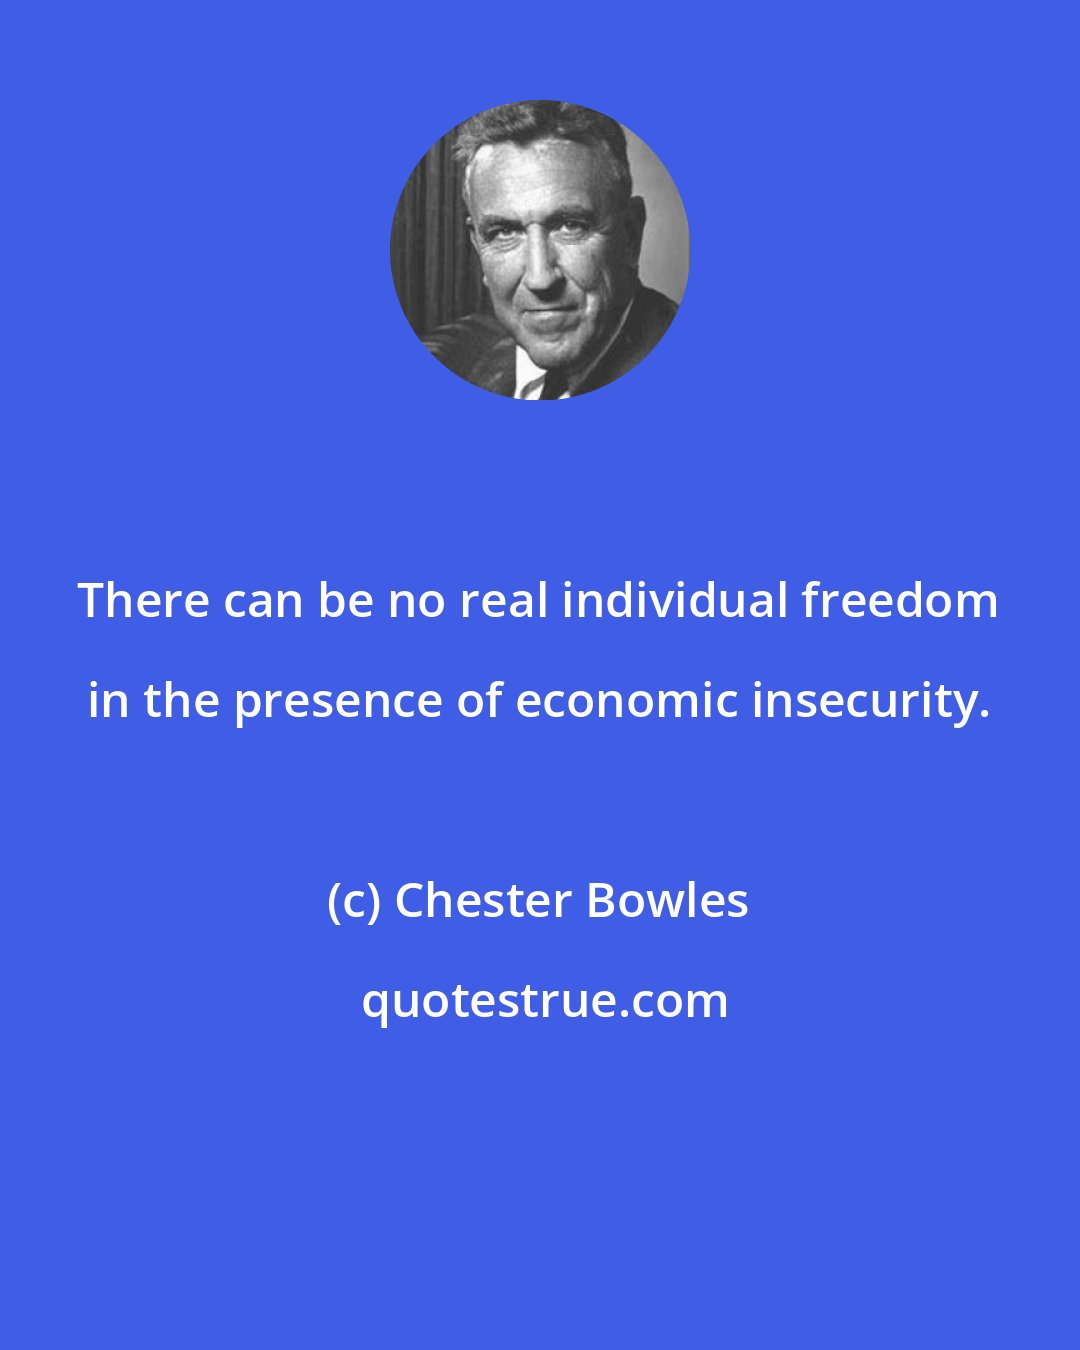 Chester Bowles: There can be no real individual freedom in the presence of economic insecurity.